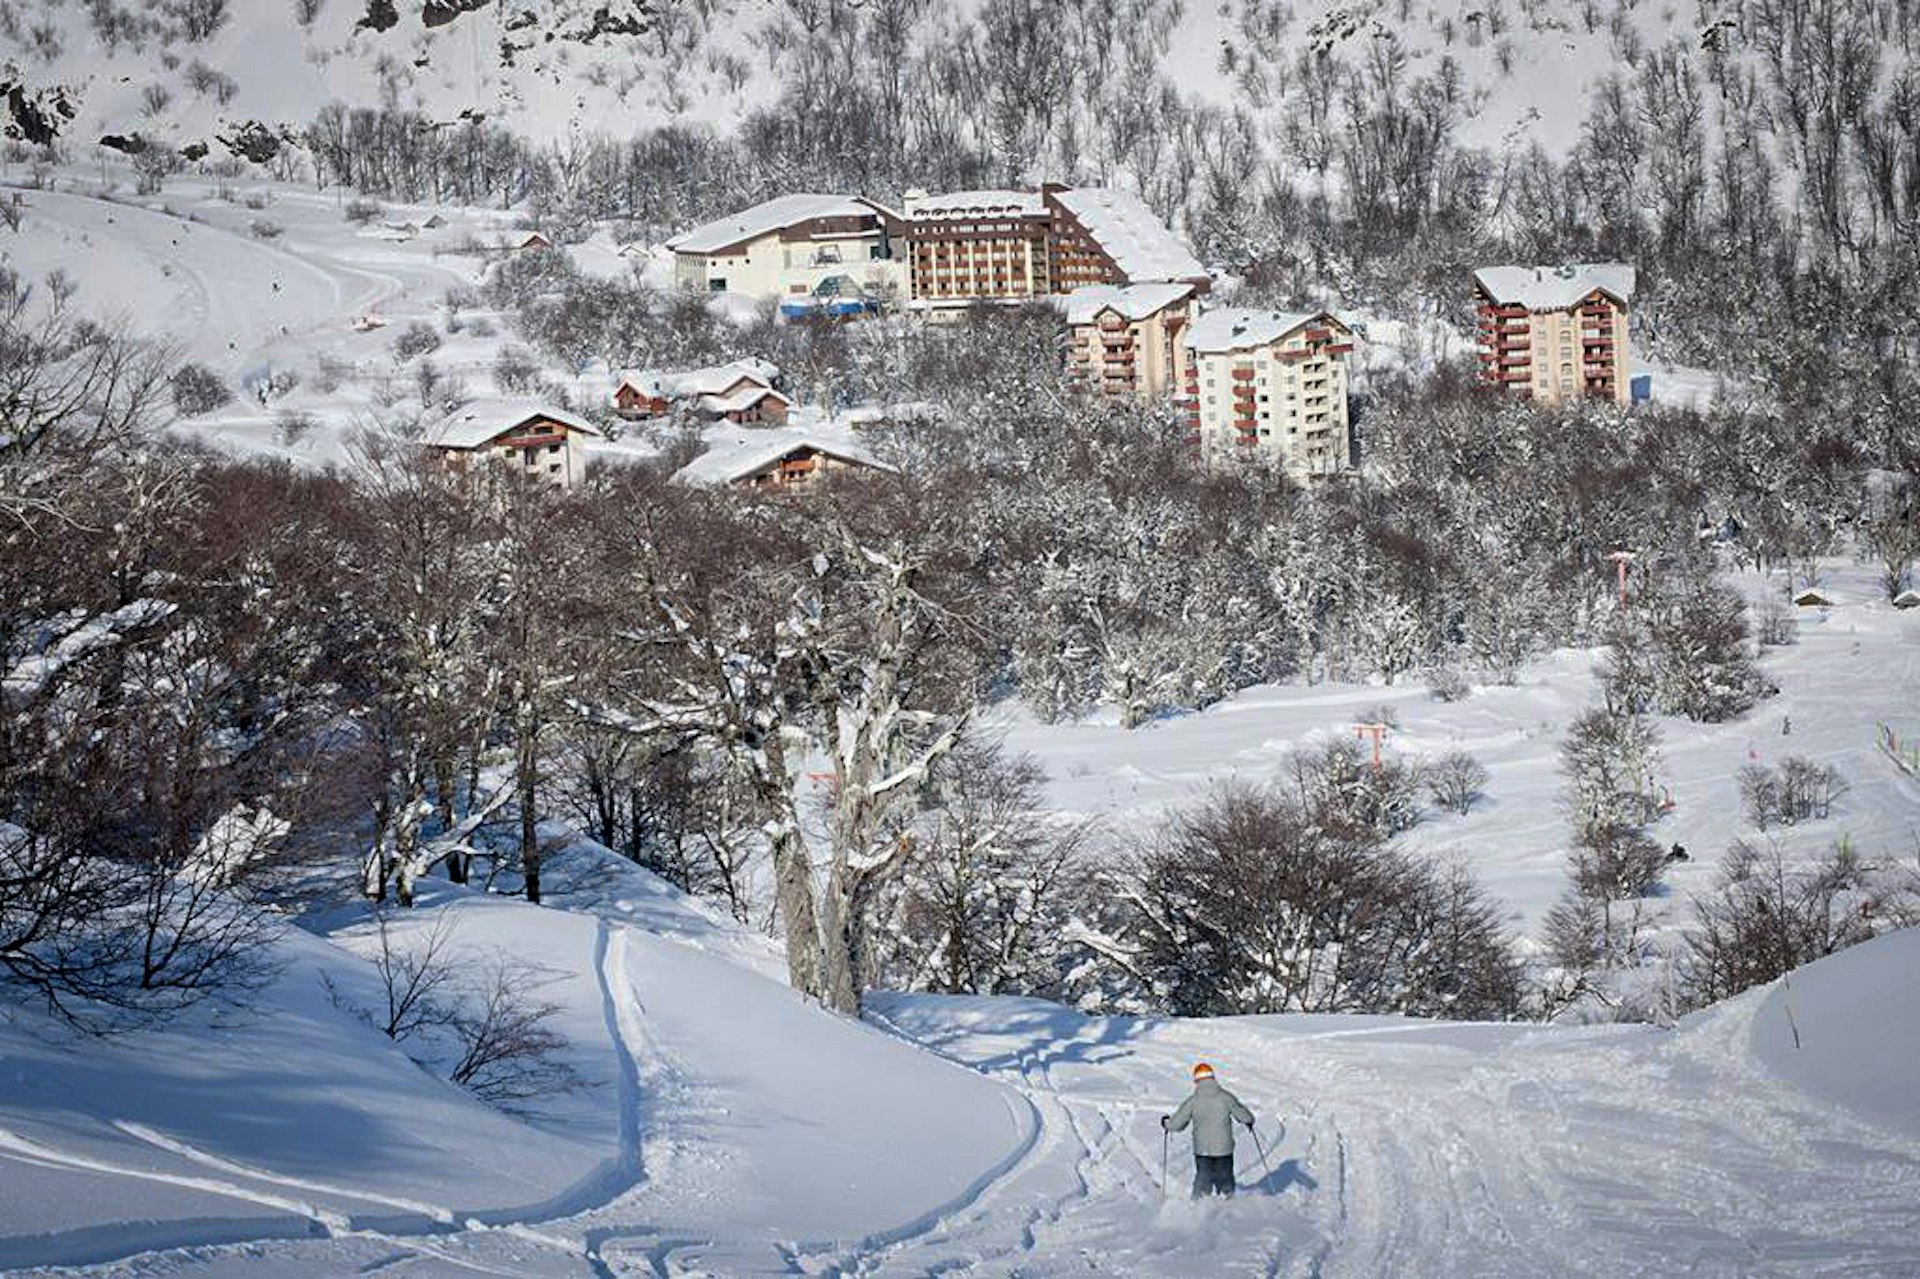 A skier skies down a hill towards a cluster of trees surrounding resort buildings at Termas de Chillán, Chile